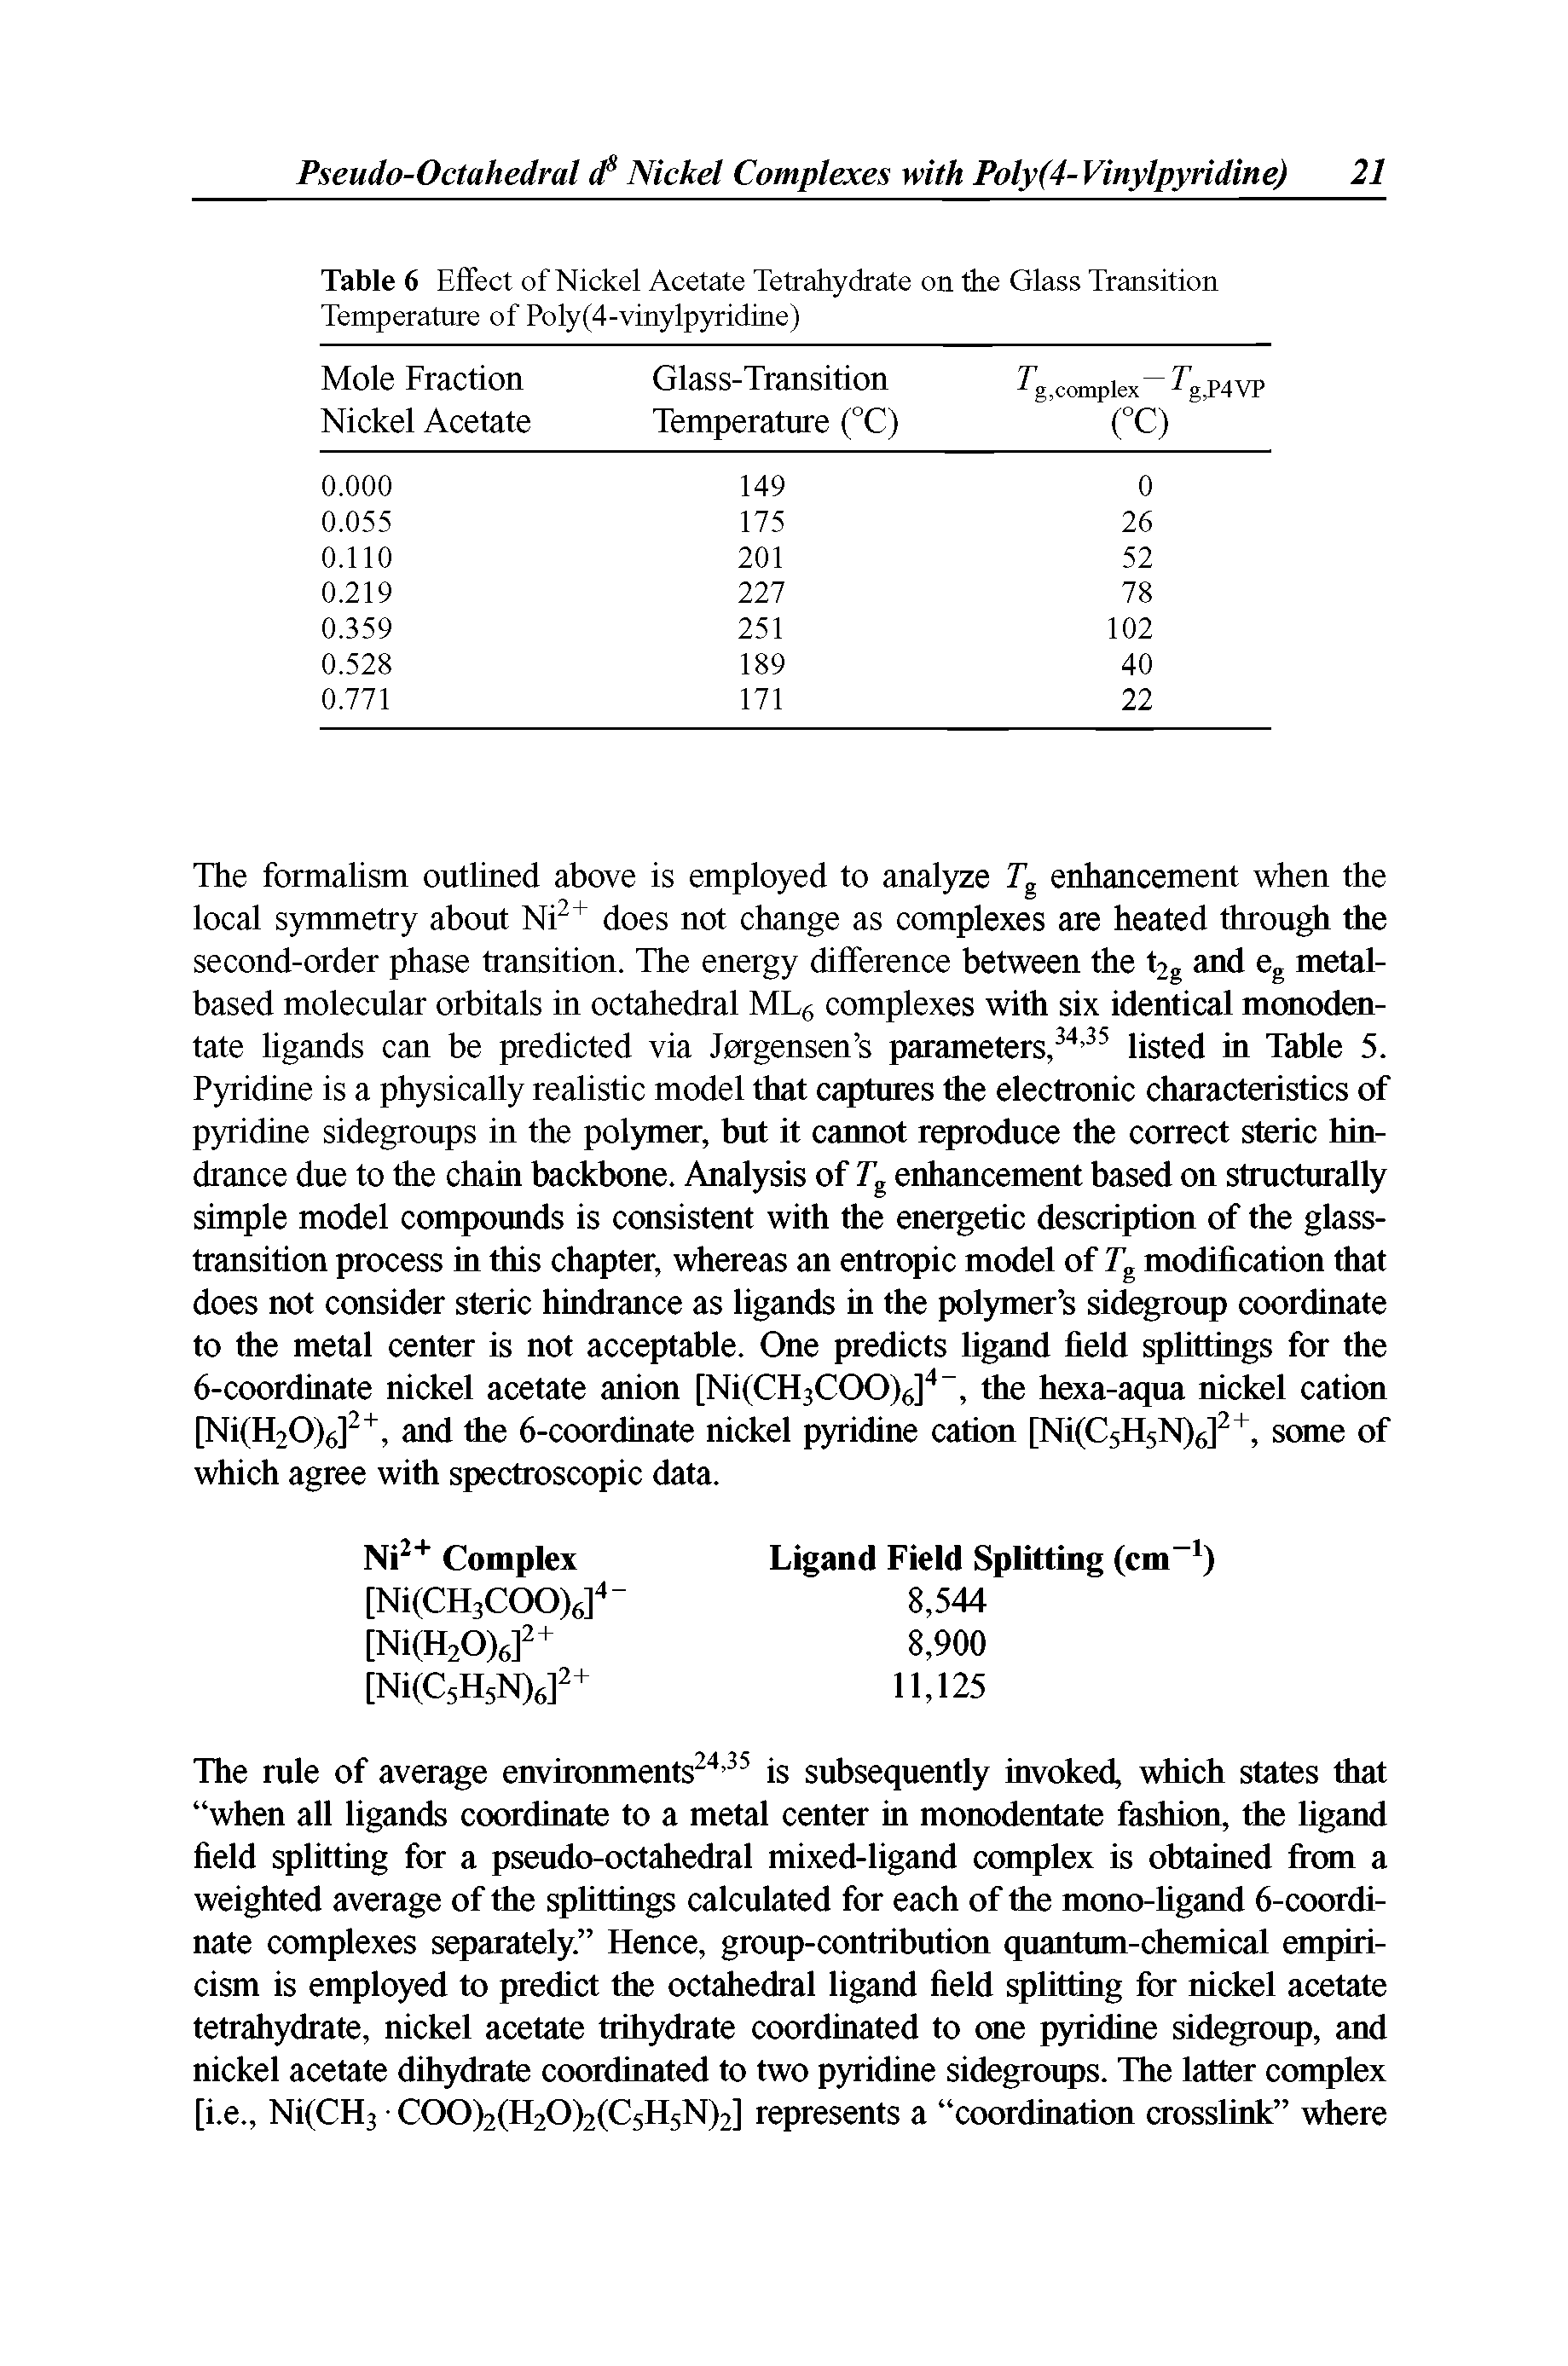 Table 6 Effect of Nickel Acetate Tetrahydrate on ffie Glass Transition Temperature of Poly(4-vinylpyridine)...